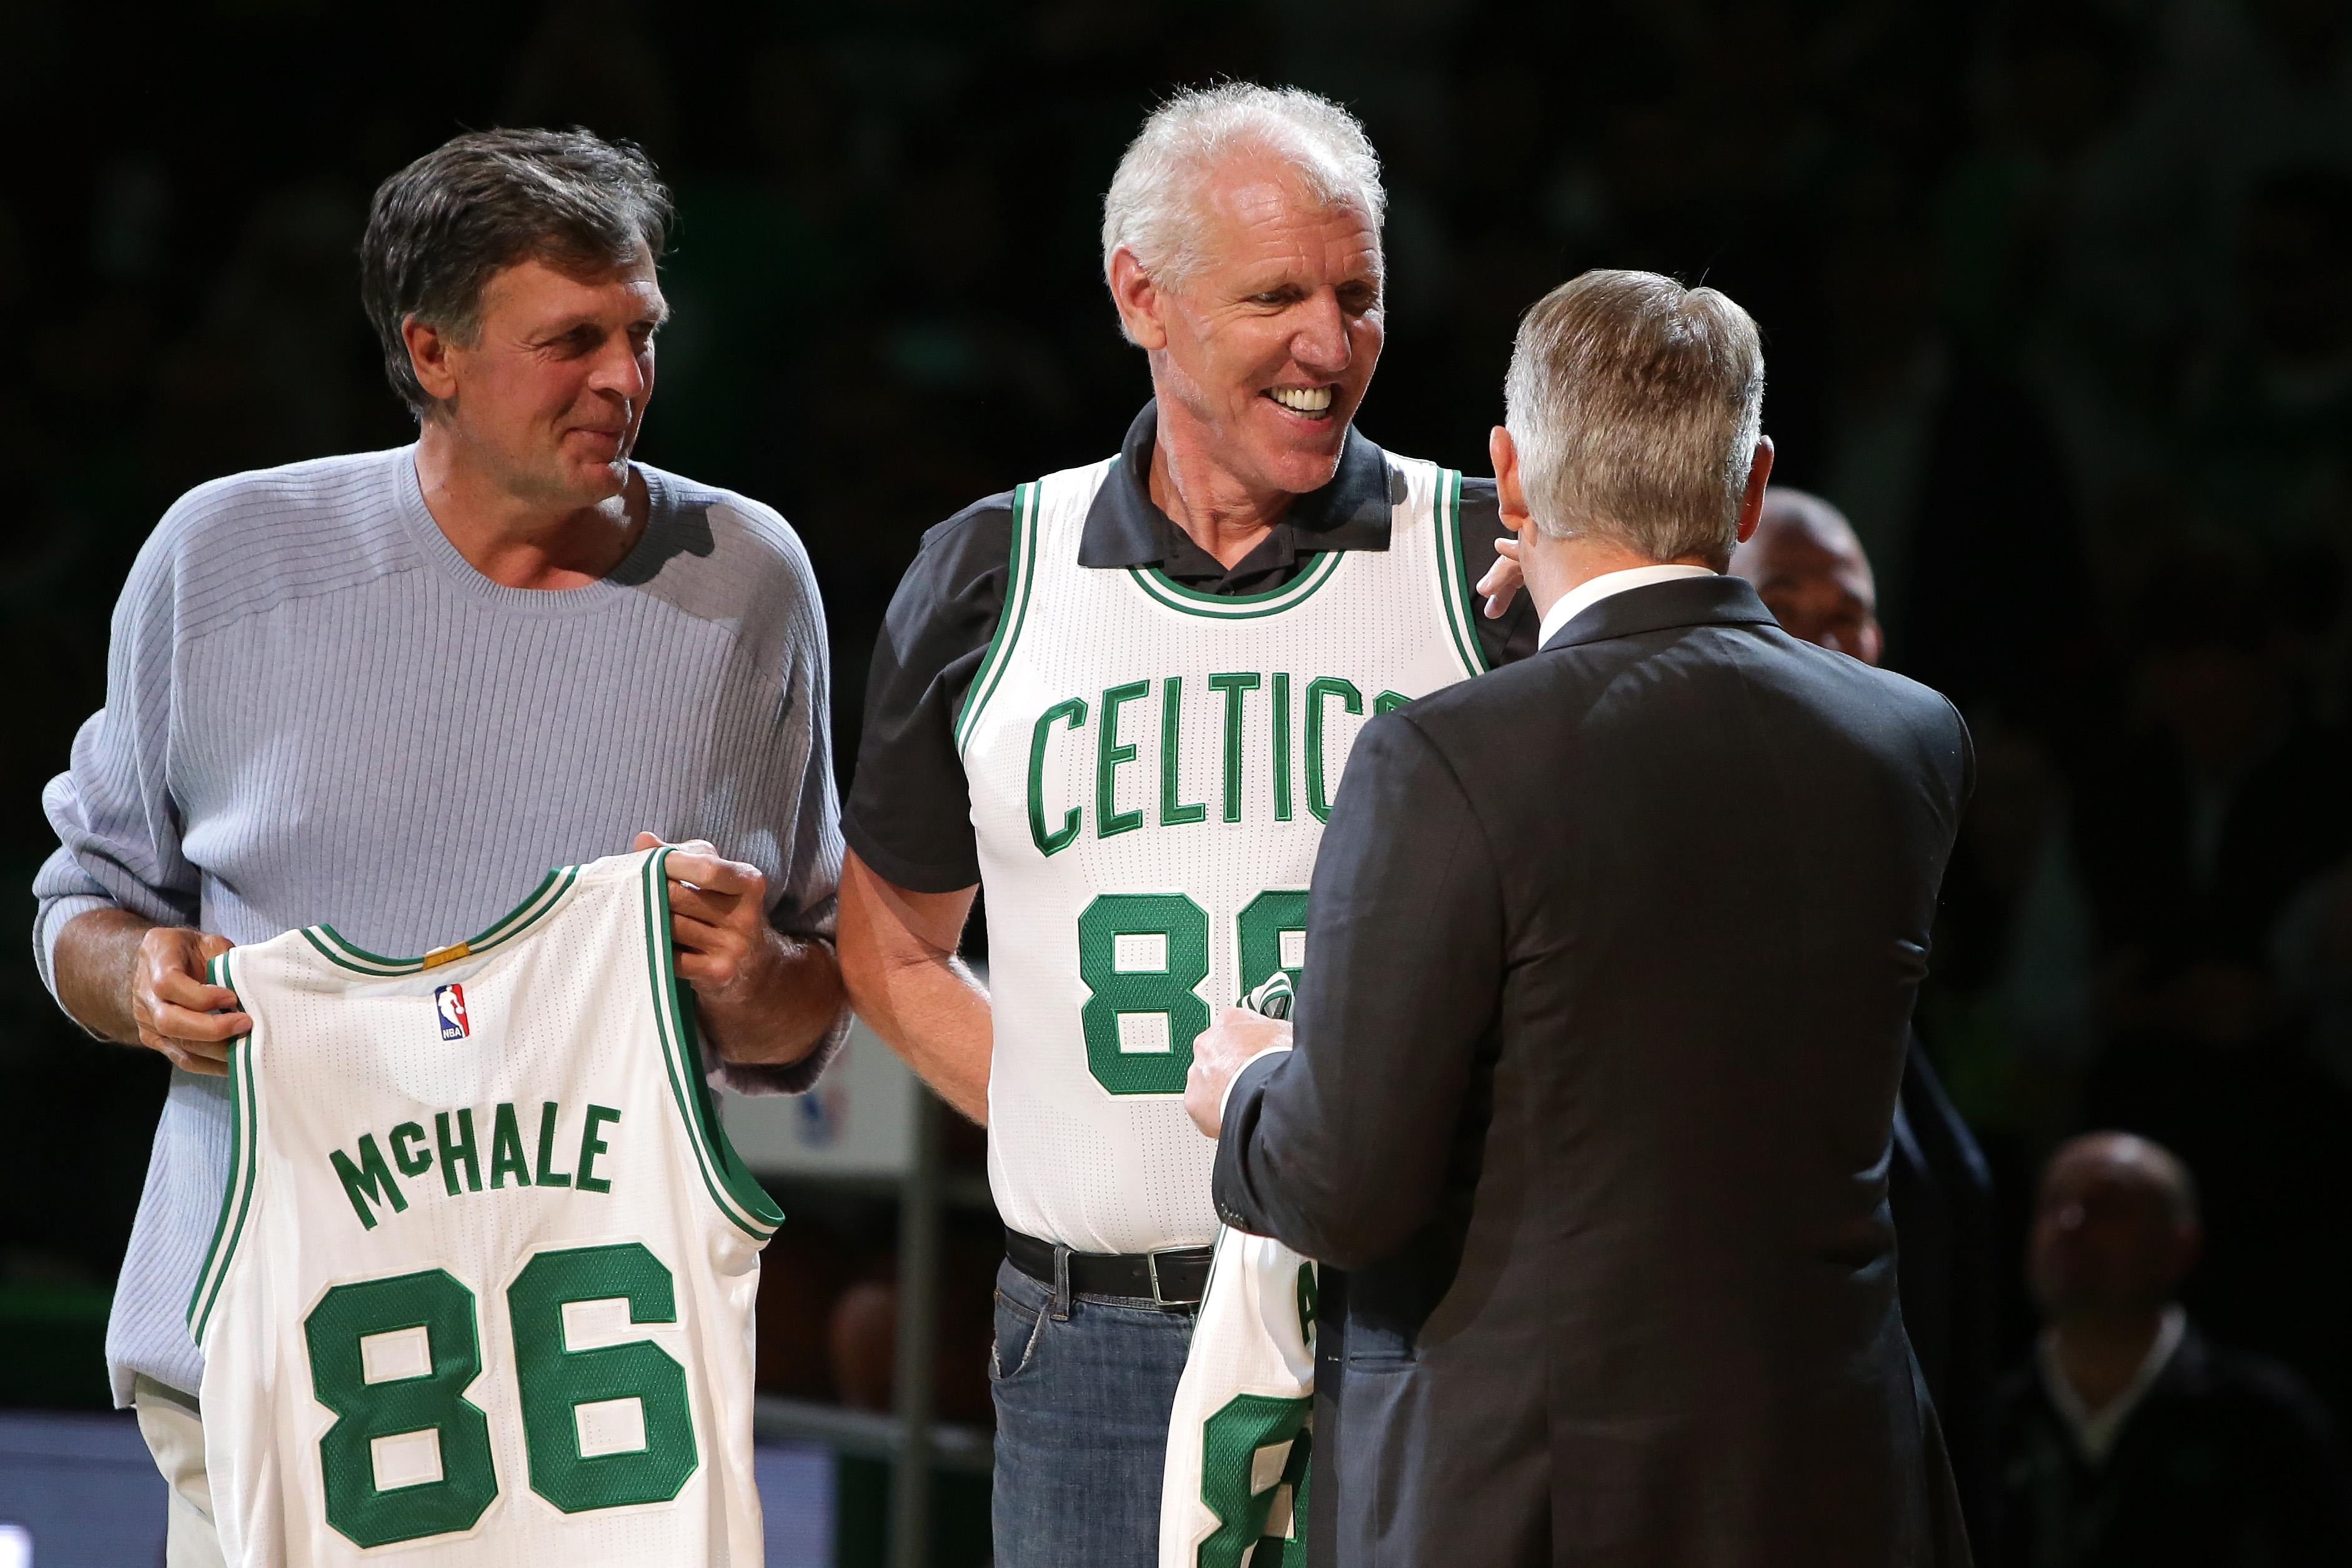 Members of the Boston Celtics 1986 championship team Kevin McHale, Bill Walton and Danny Ainge are honored.